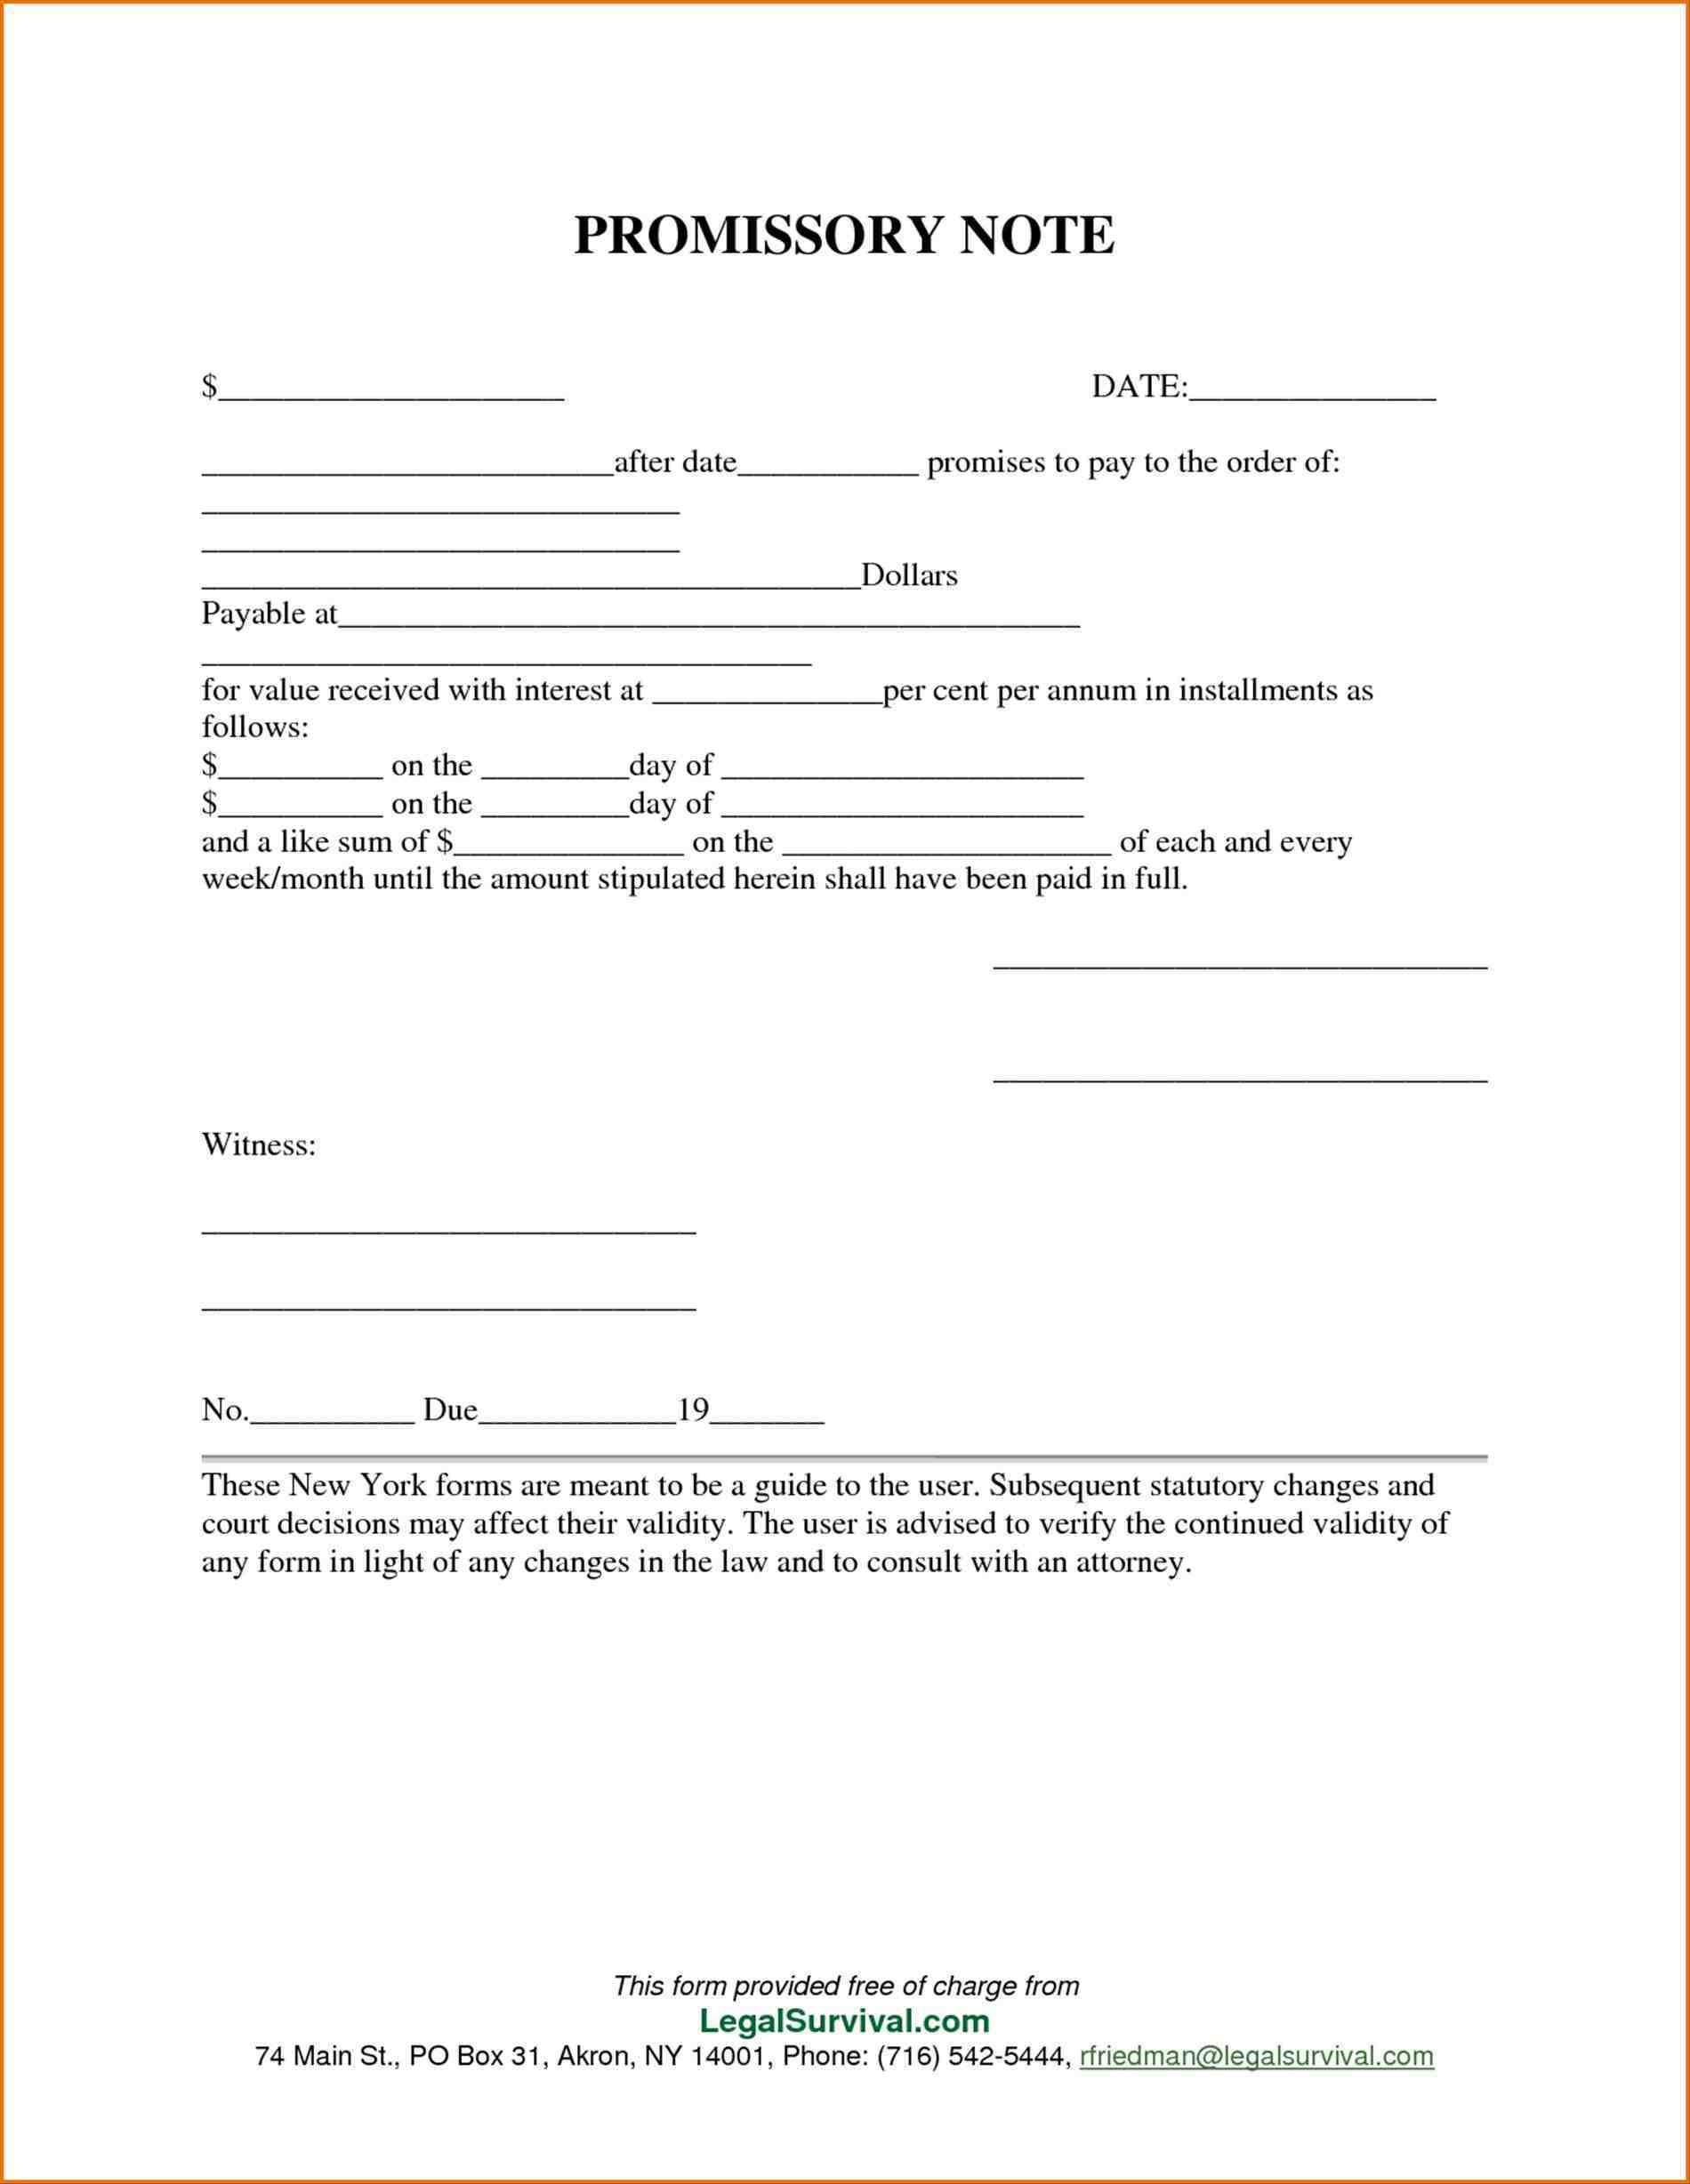 Collateral Template Inventory Sample Auto Vehicle Promissory Note 